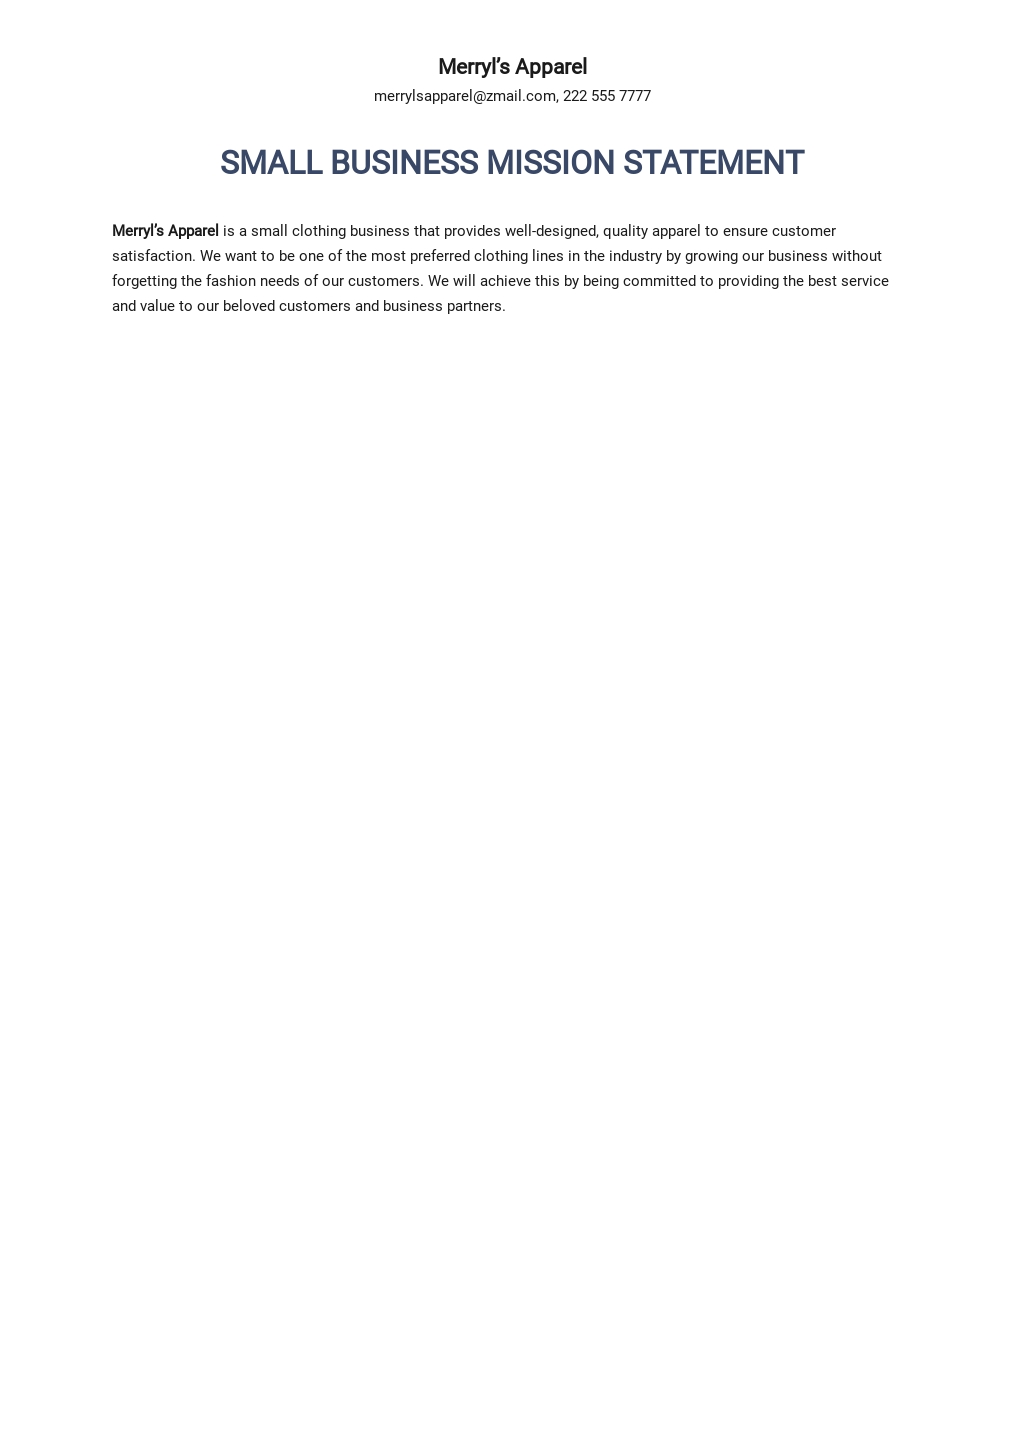 Small Business Mission Statement Template.jpe